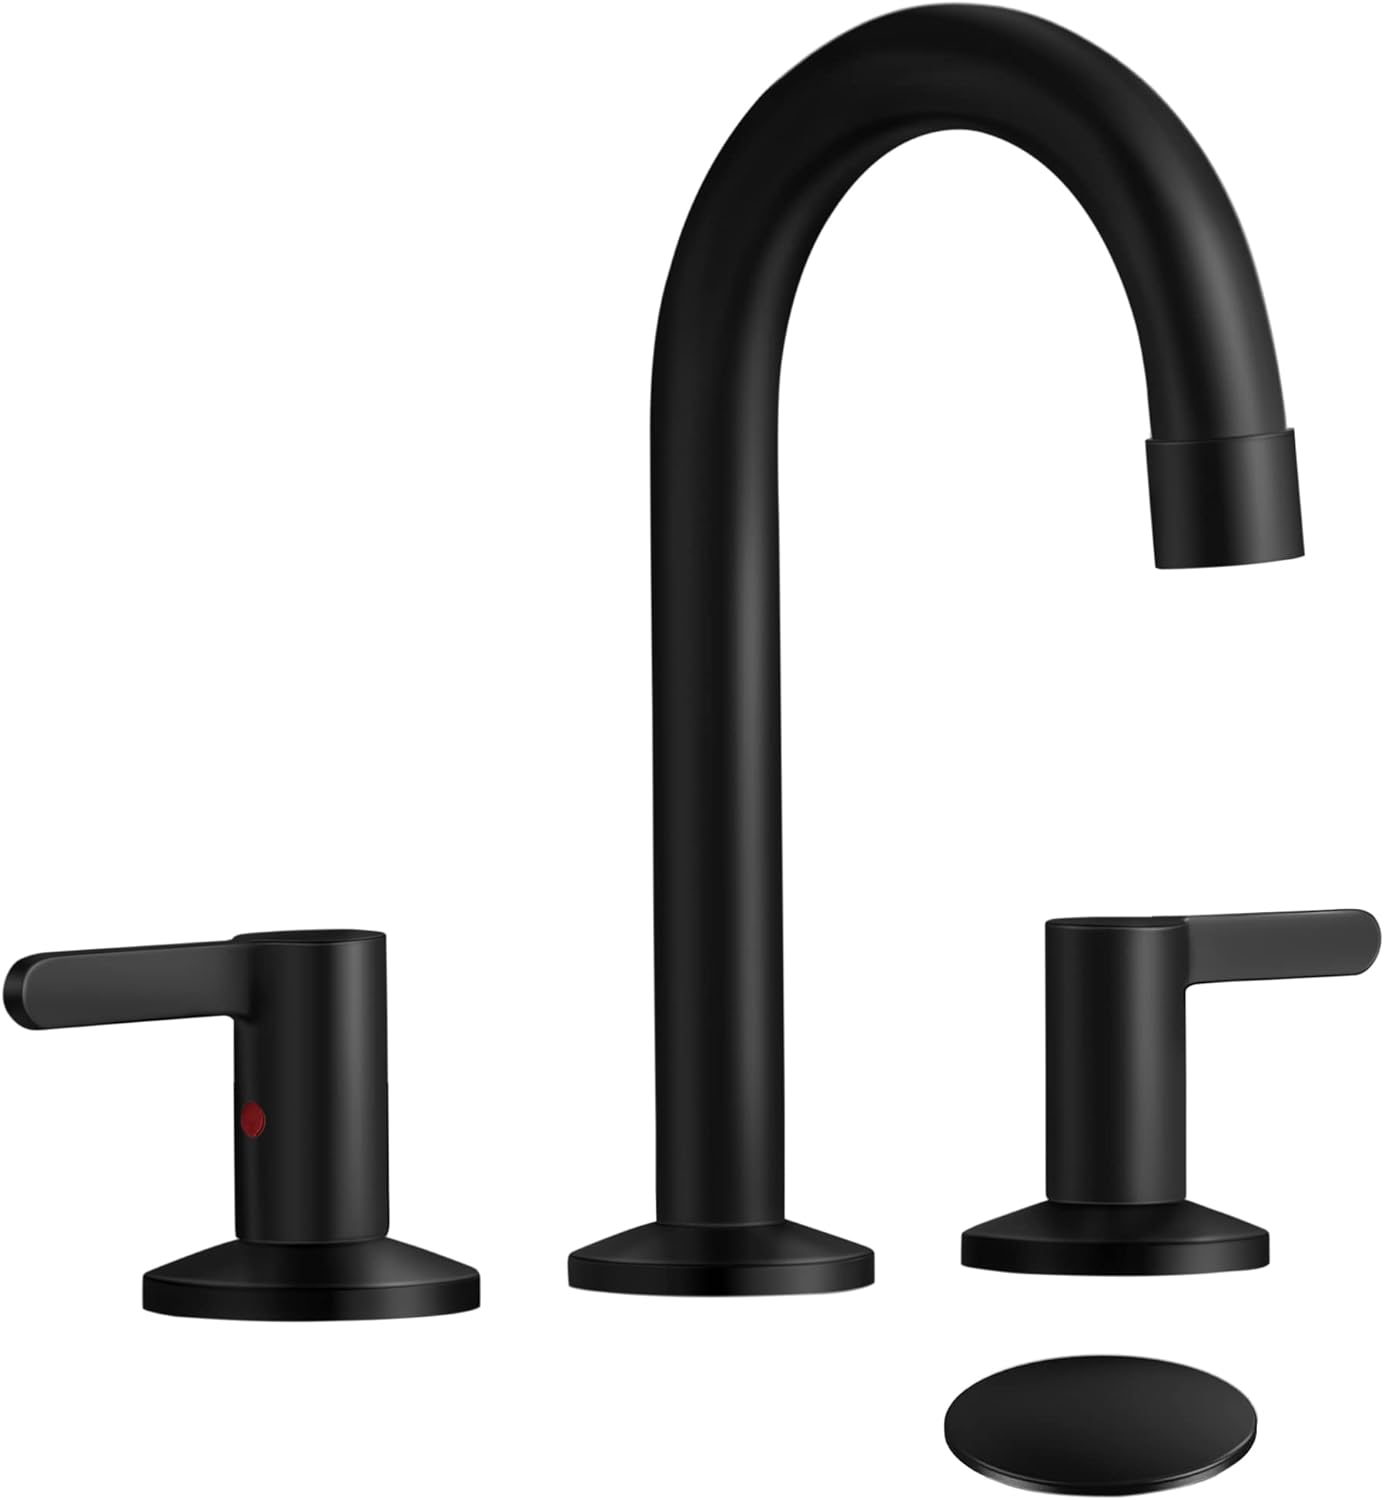 Bathroom Faucet 3 Hole ARRISEA 8 Inch Widespread Bathroom Faucet with Pop Up, Matte Black Bathroom Faucets for Sink 3 Hole, 2 Handle Vanity Faucet for Bathroom Sink, BF012-1-MB